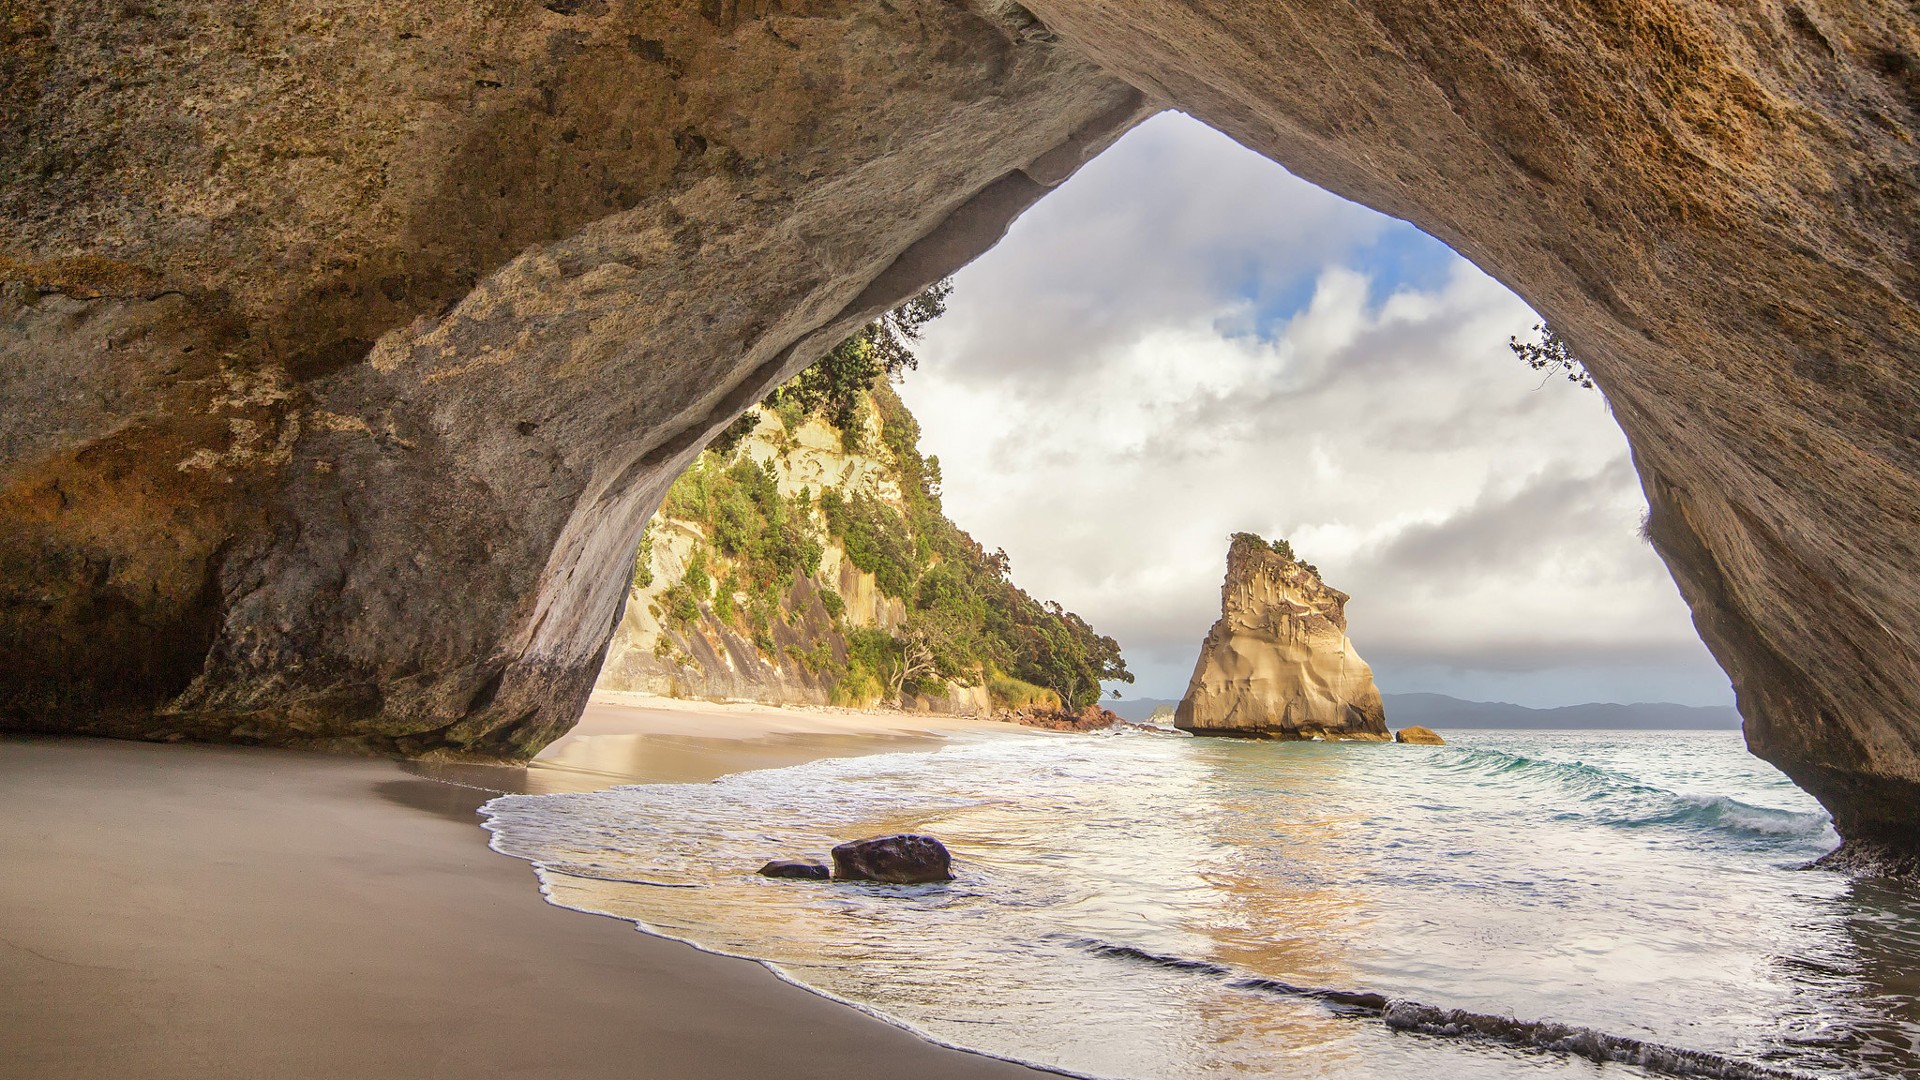 General 1920x1080 New Zealand beach nature sand cave waves clouds calm rock formation